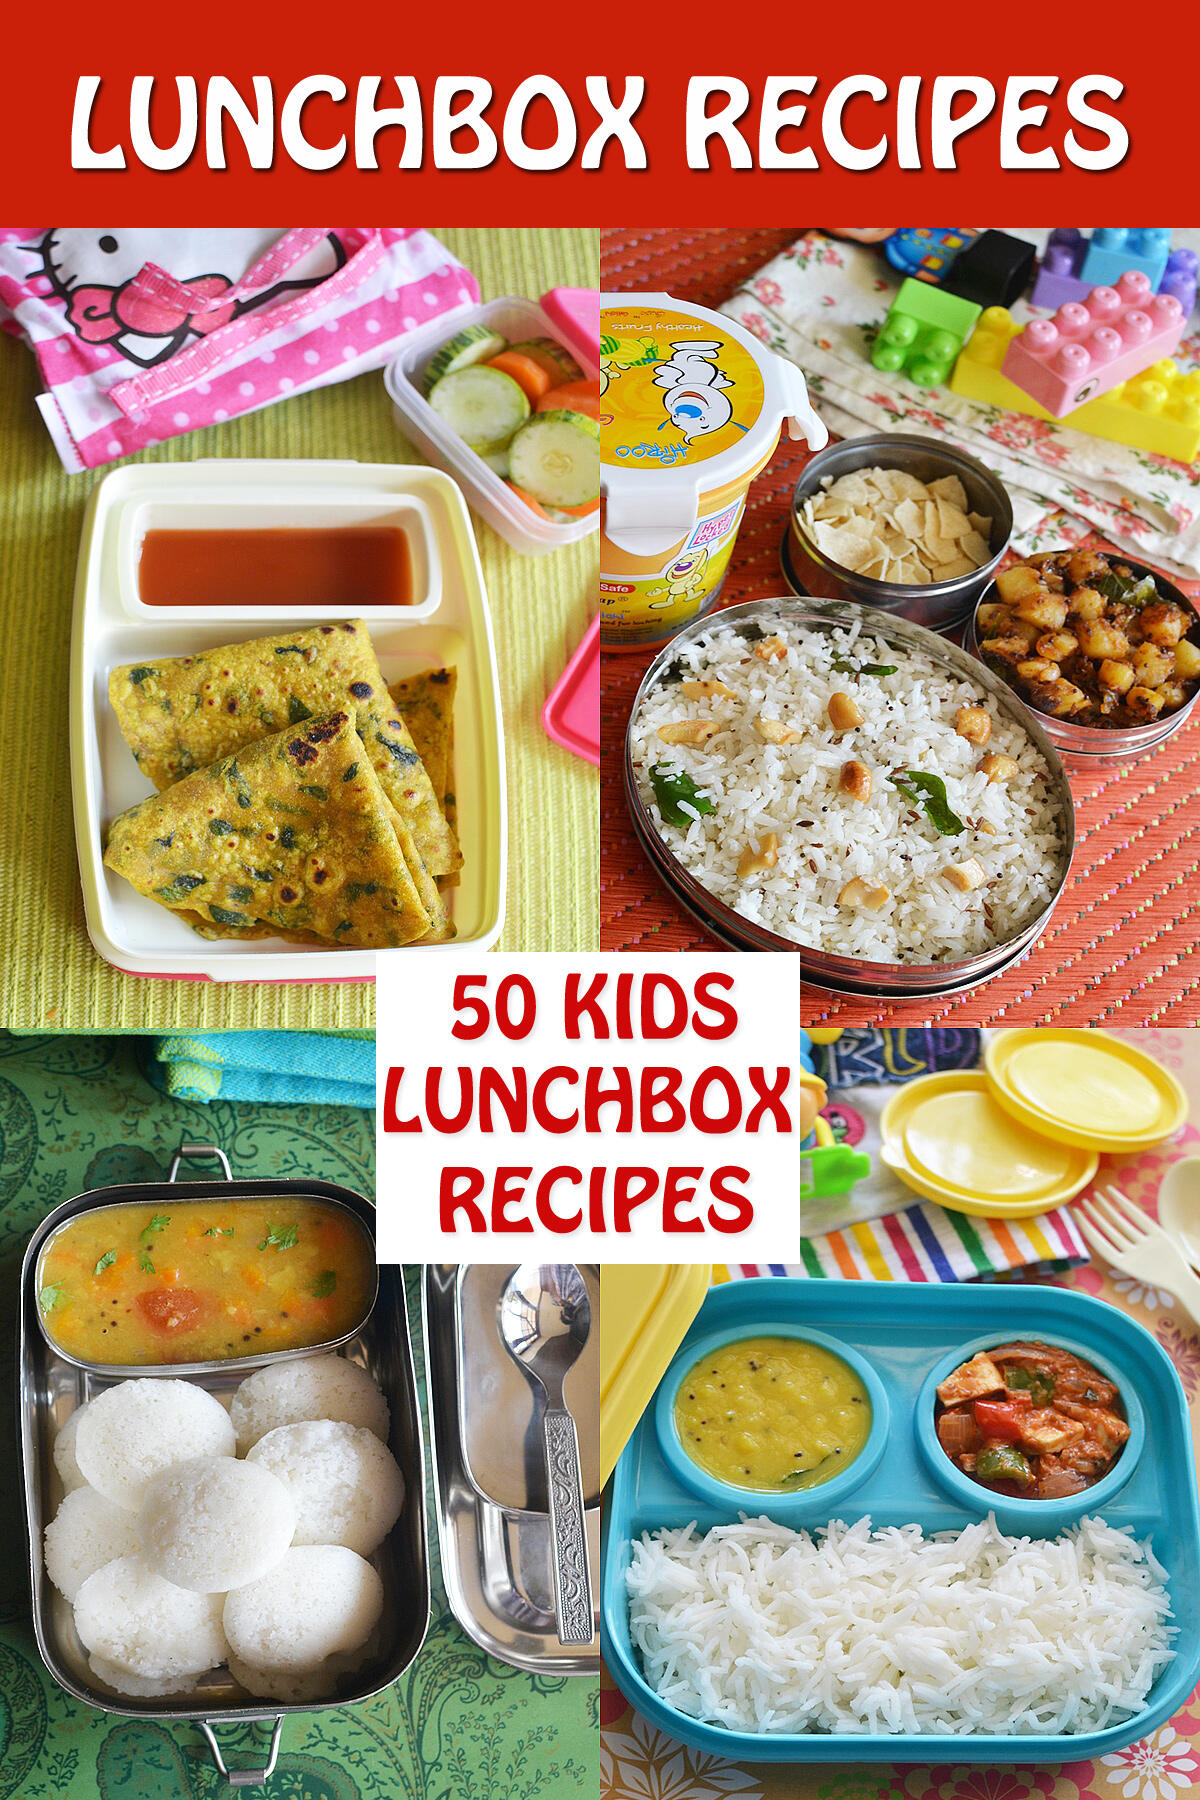 Back to School - Snack Packing Made Easy - Cooking Curries